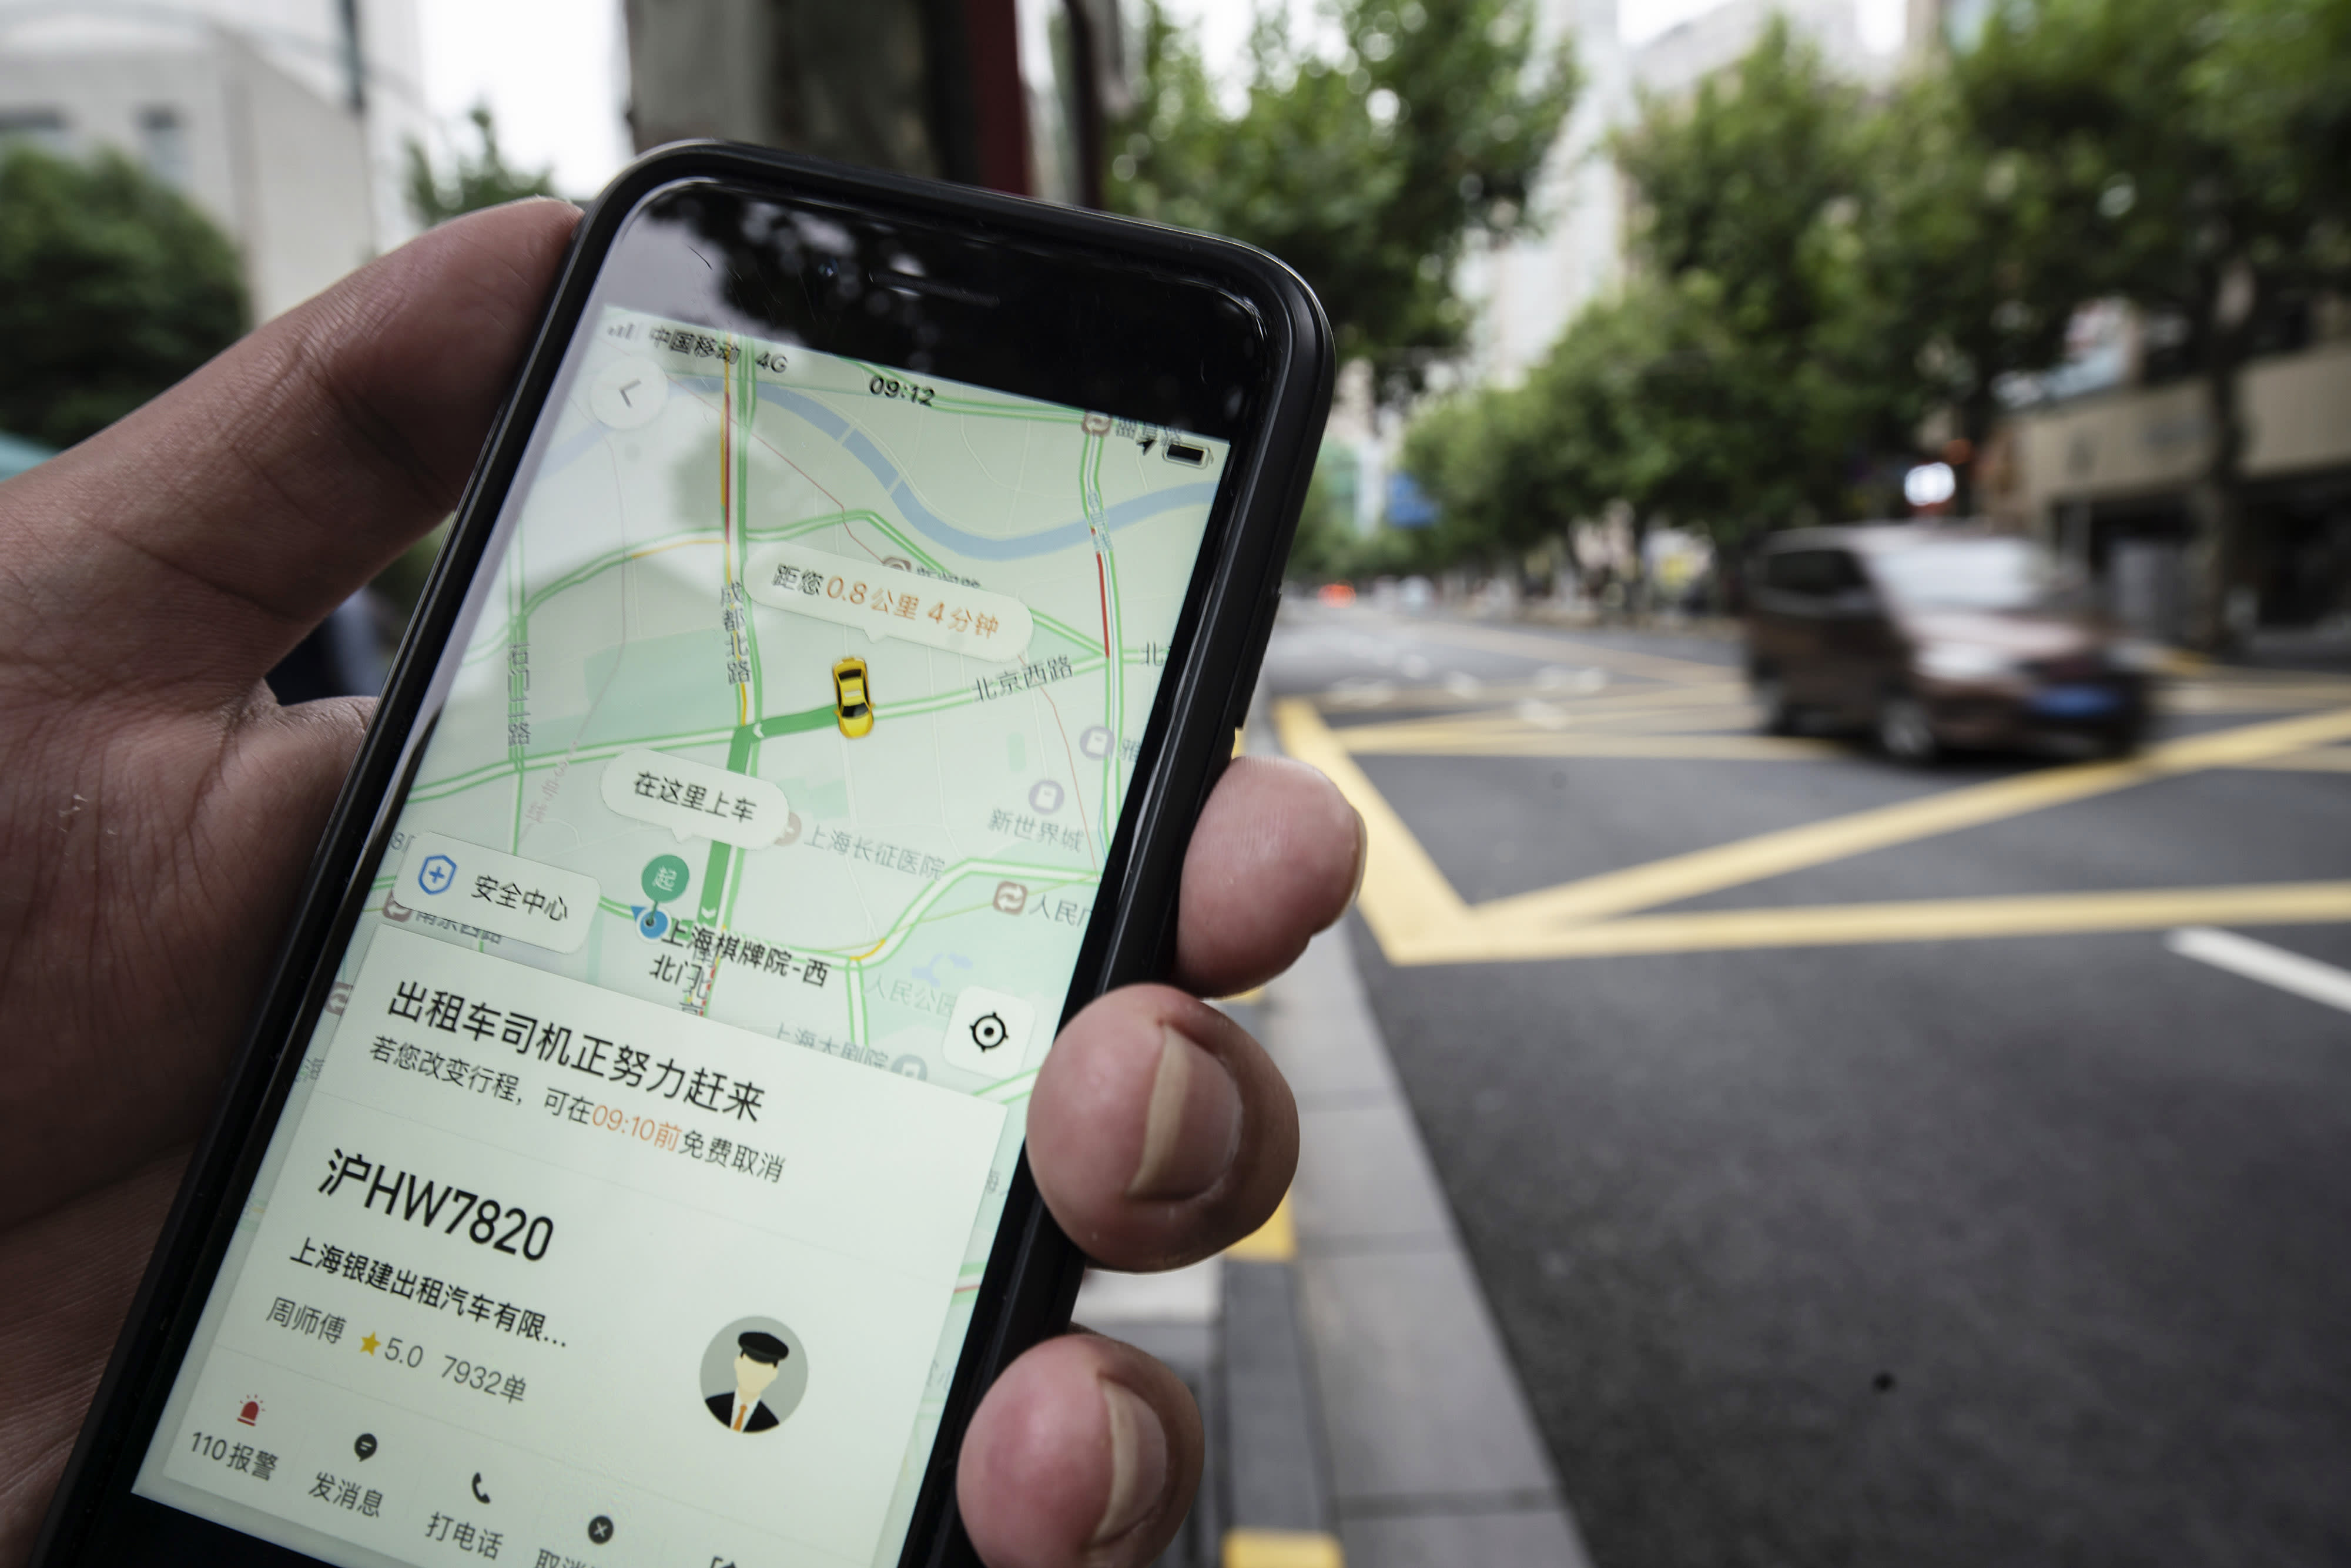 Didi shares pop more than 17%, valuing Chinese ride-hailing company near $80 billion - CNBC